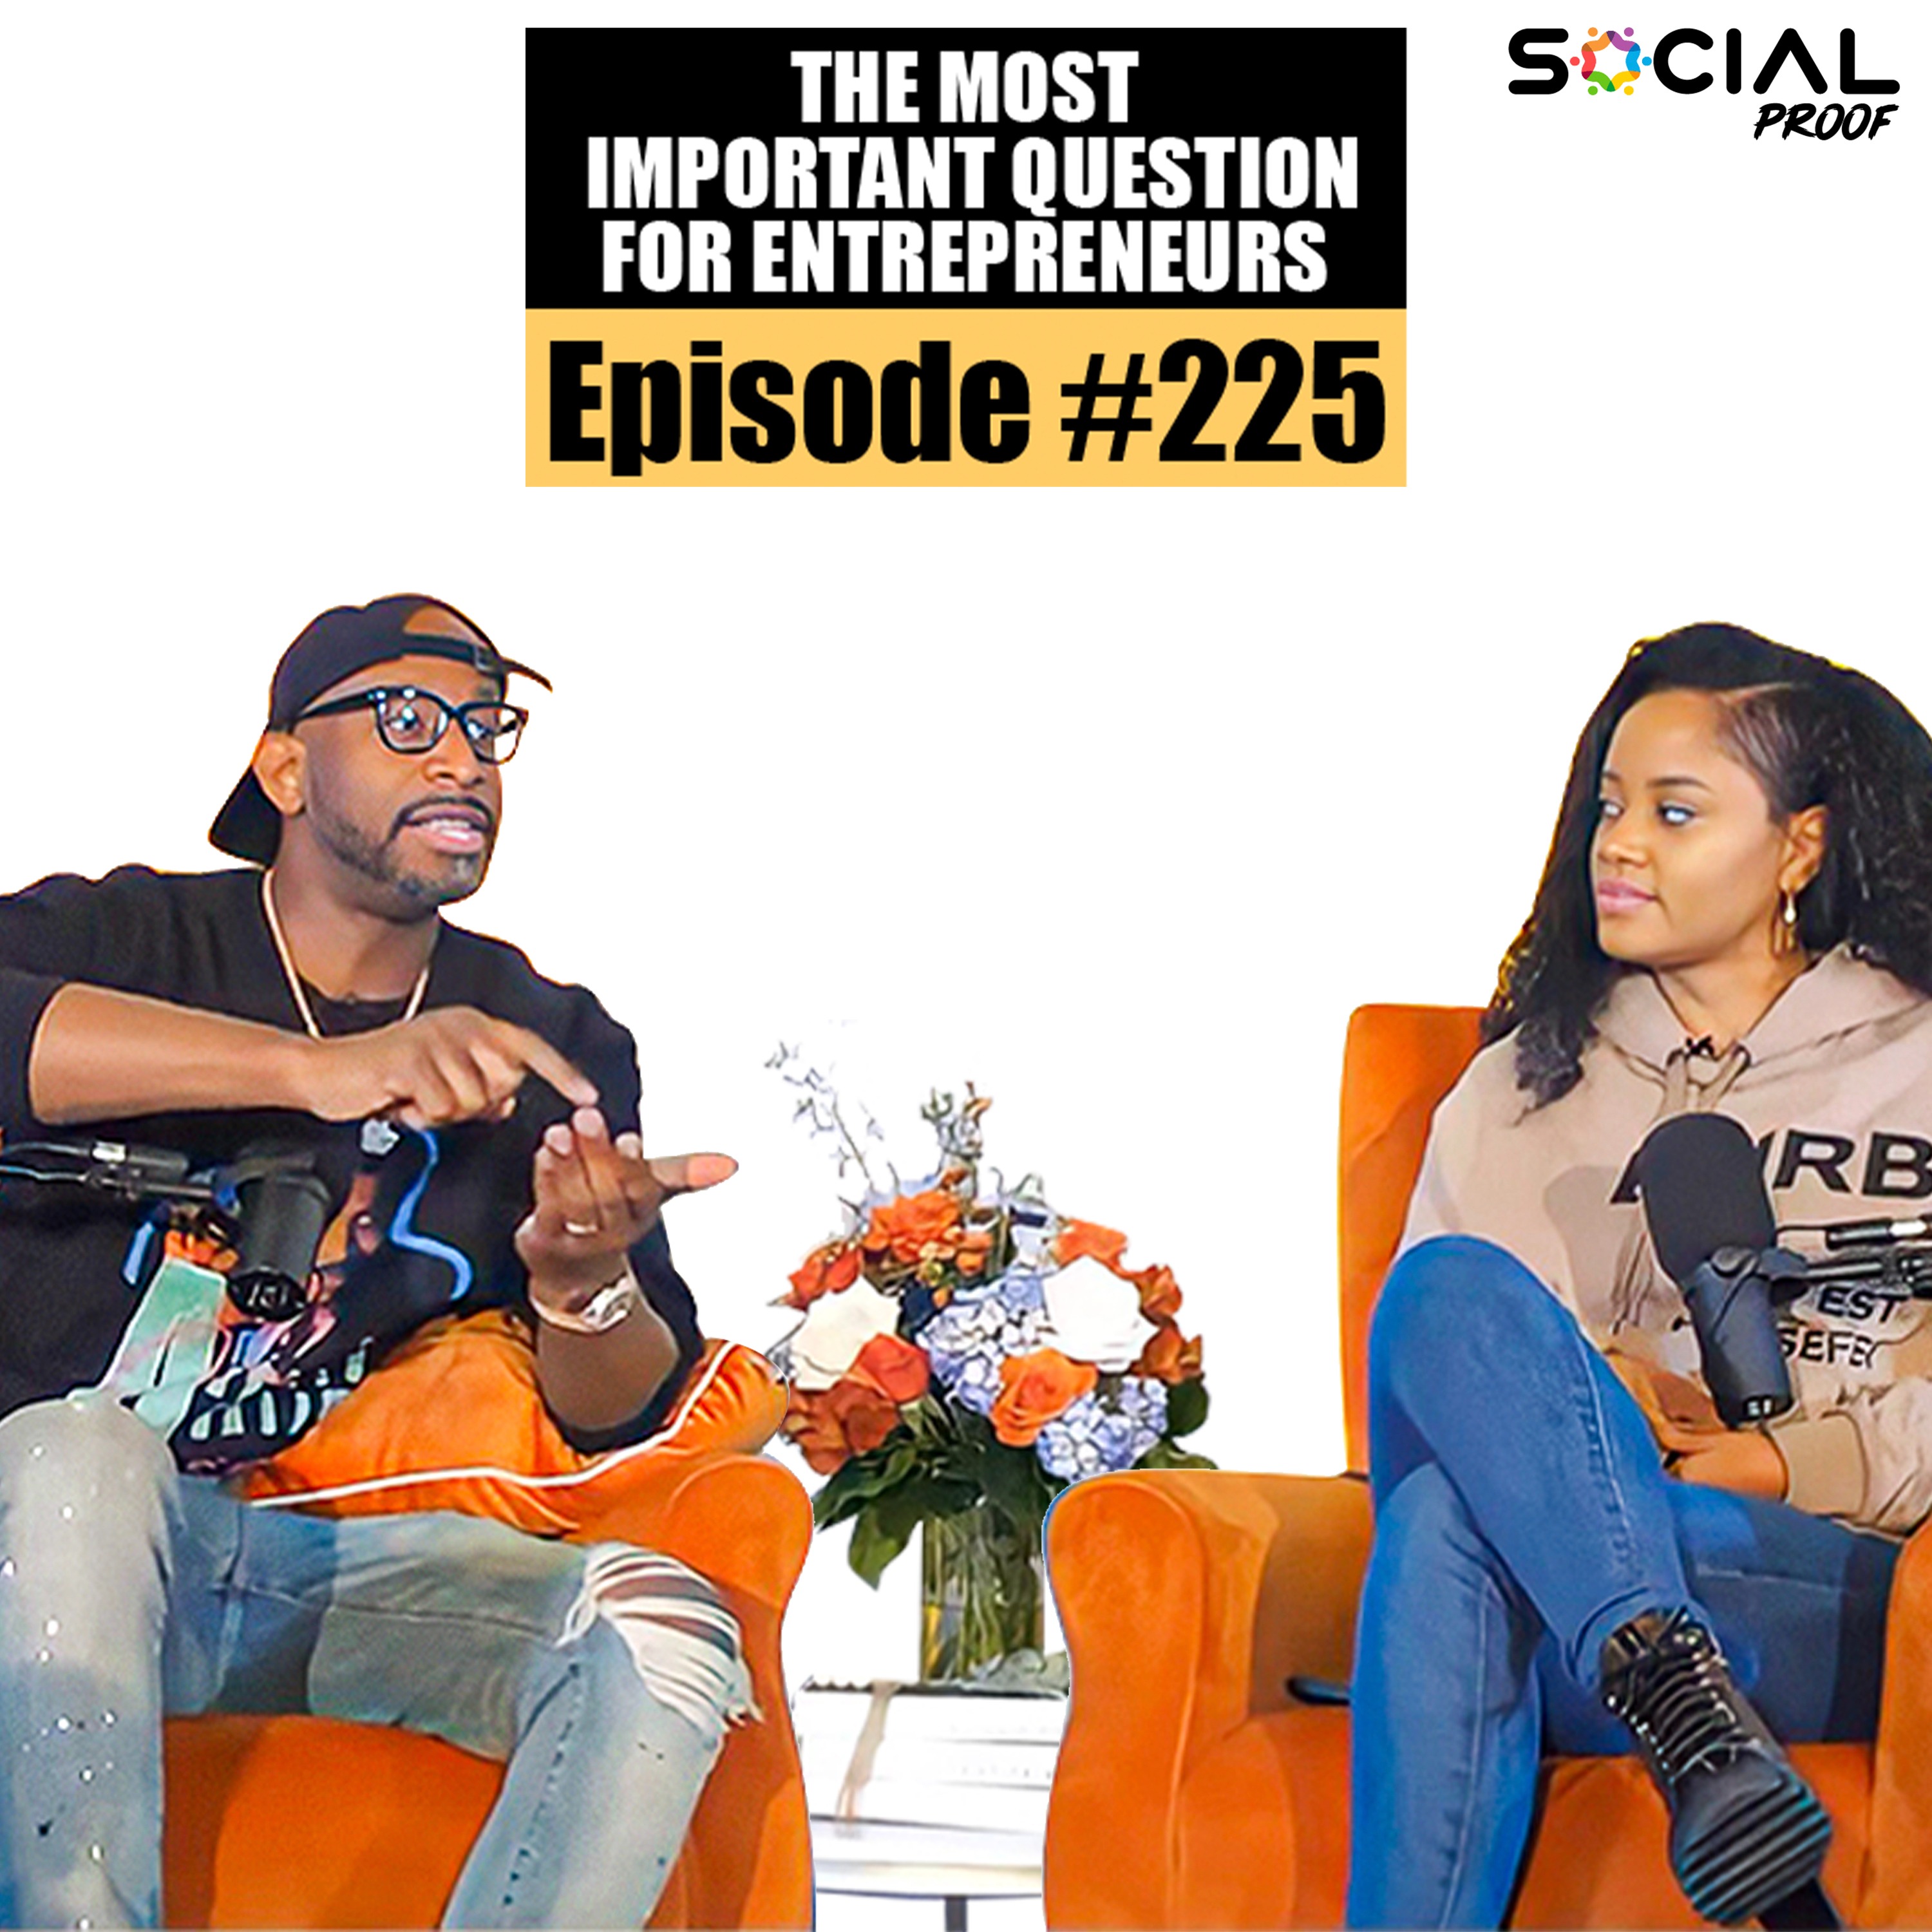 The Most Important Question For Entrepreneurs - Episode #225 w/ David & Donni